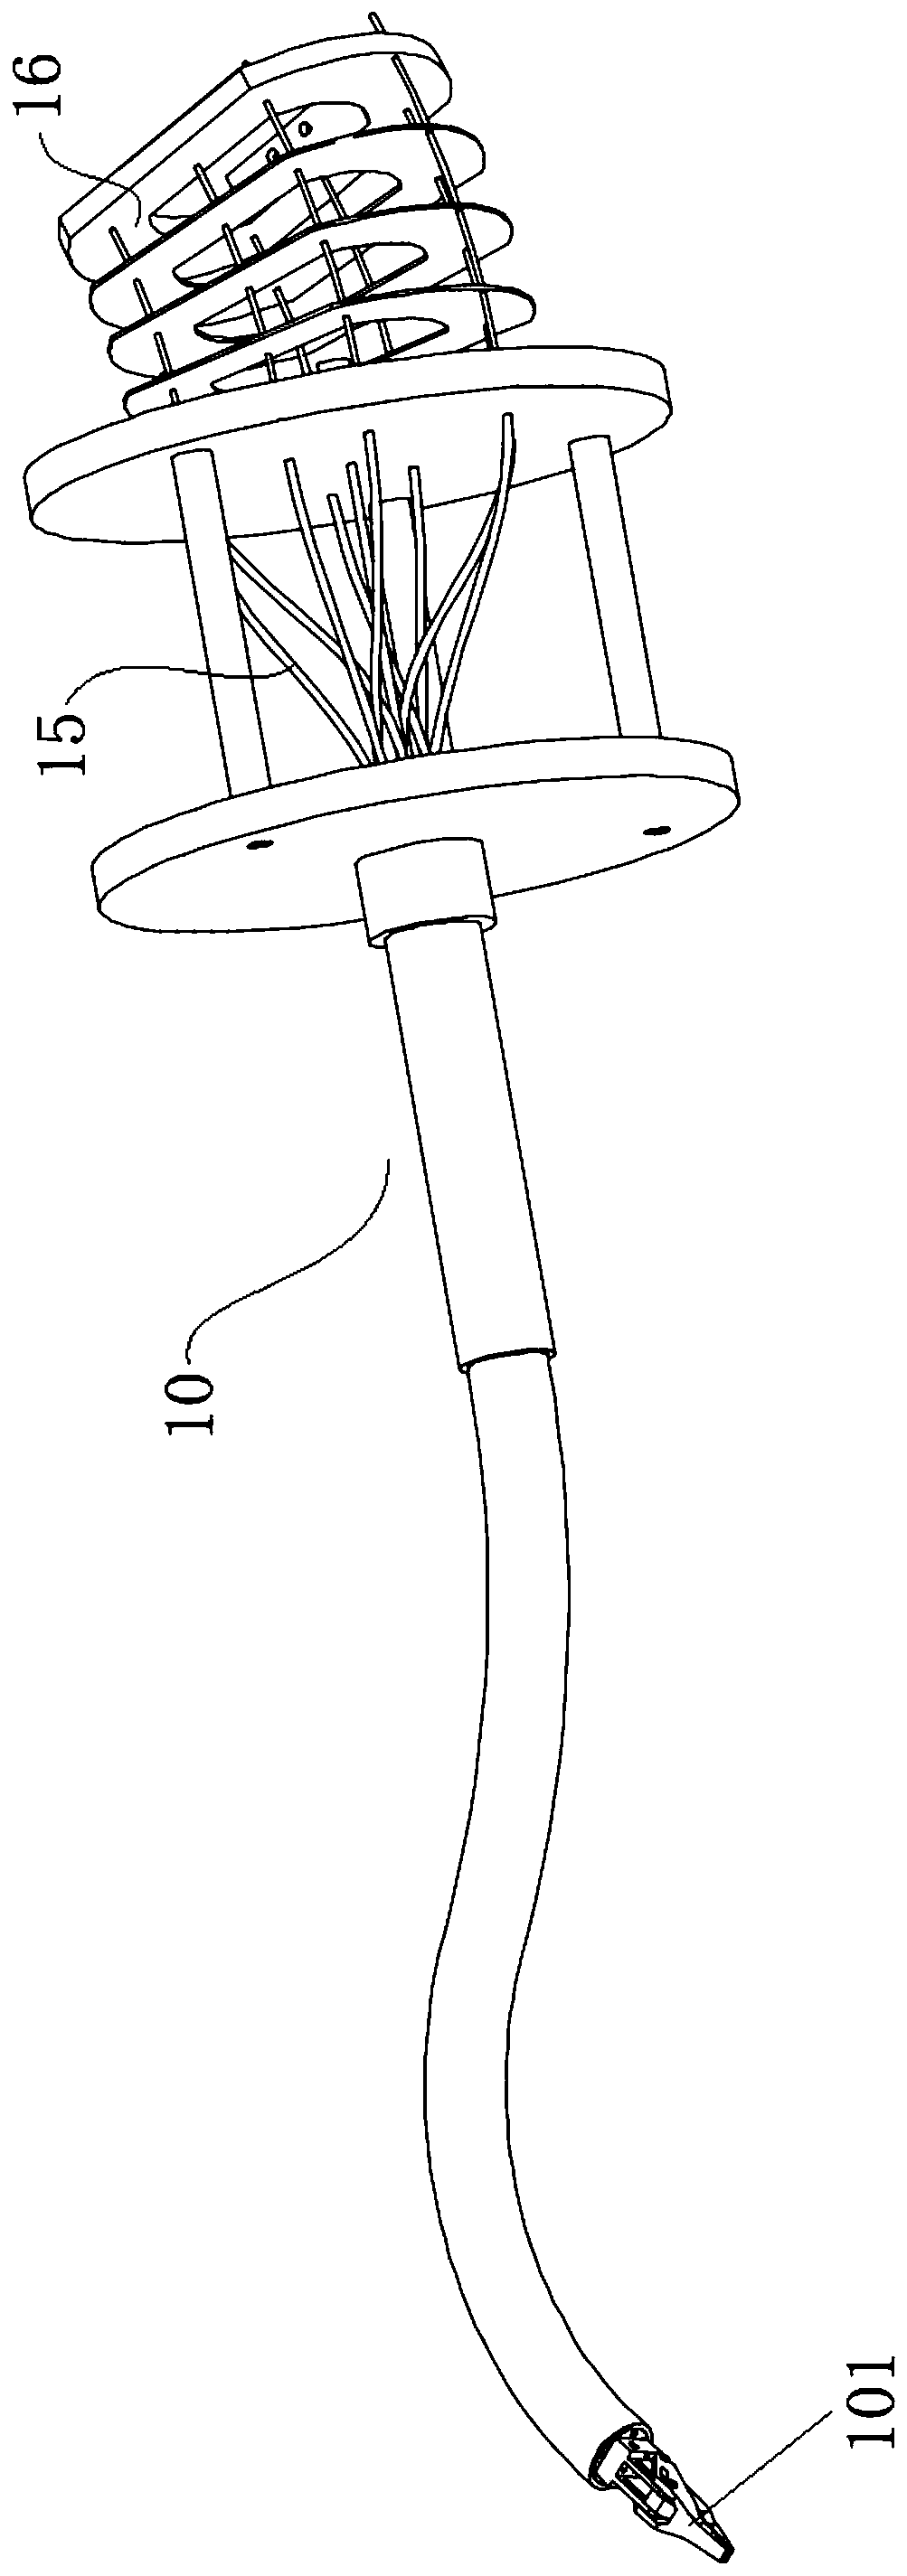 A flexible surgical tool with structural bone intersection arrangement